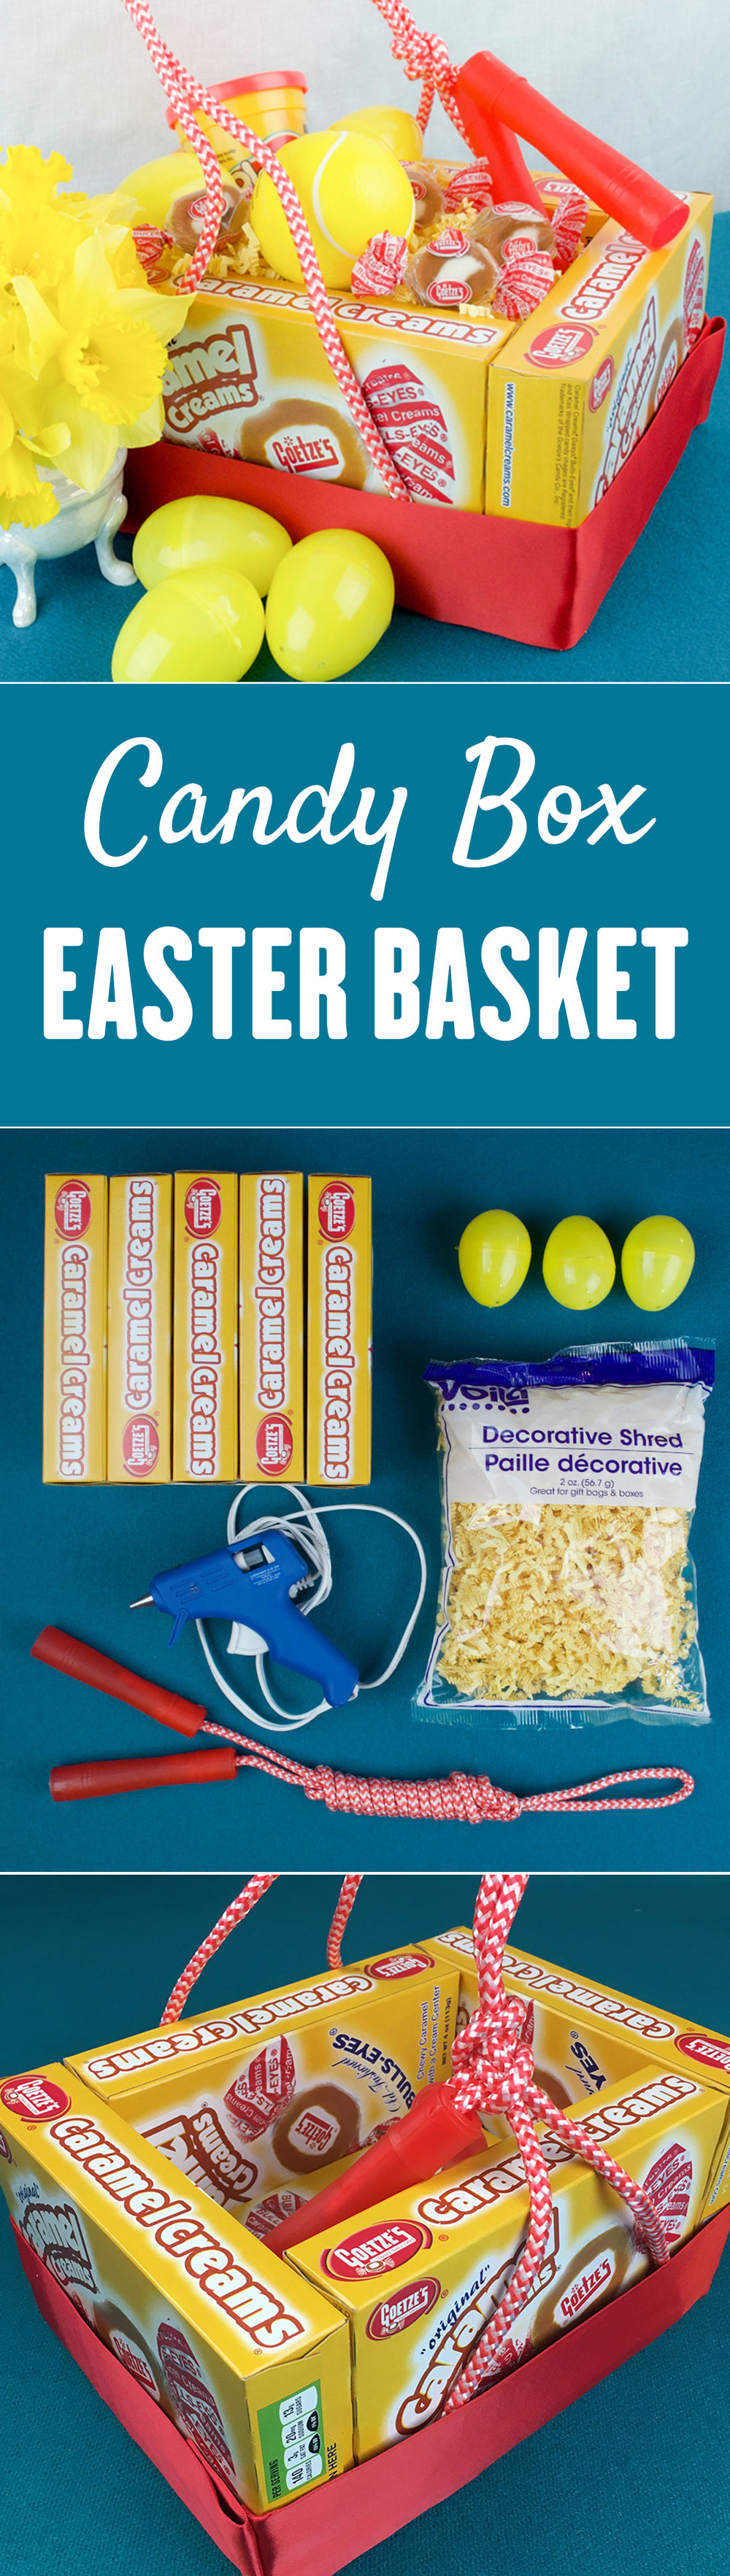 candy-box-easter-basket-05